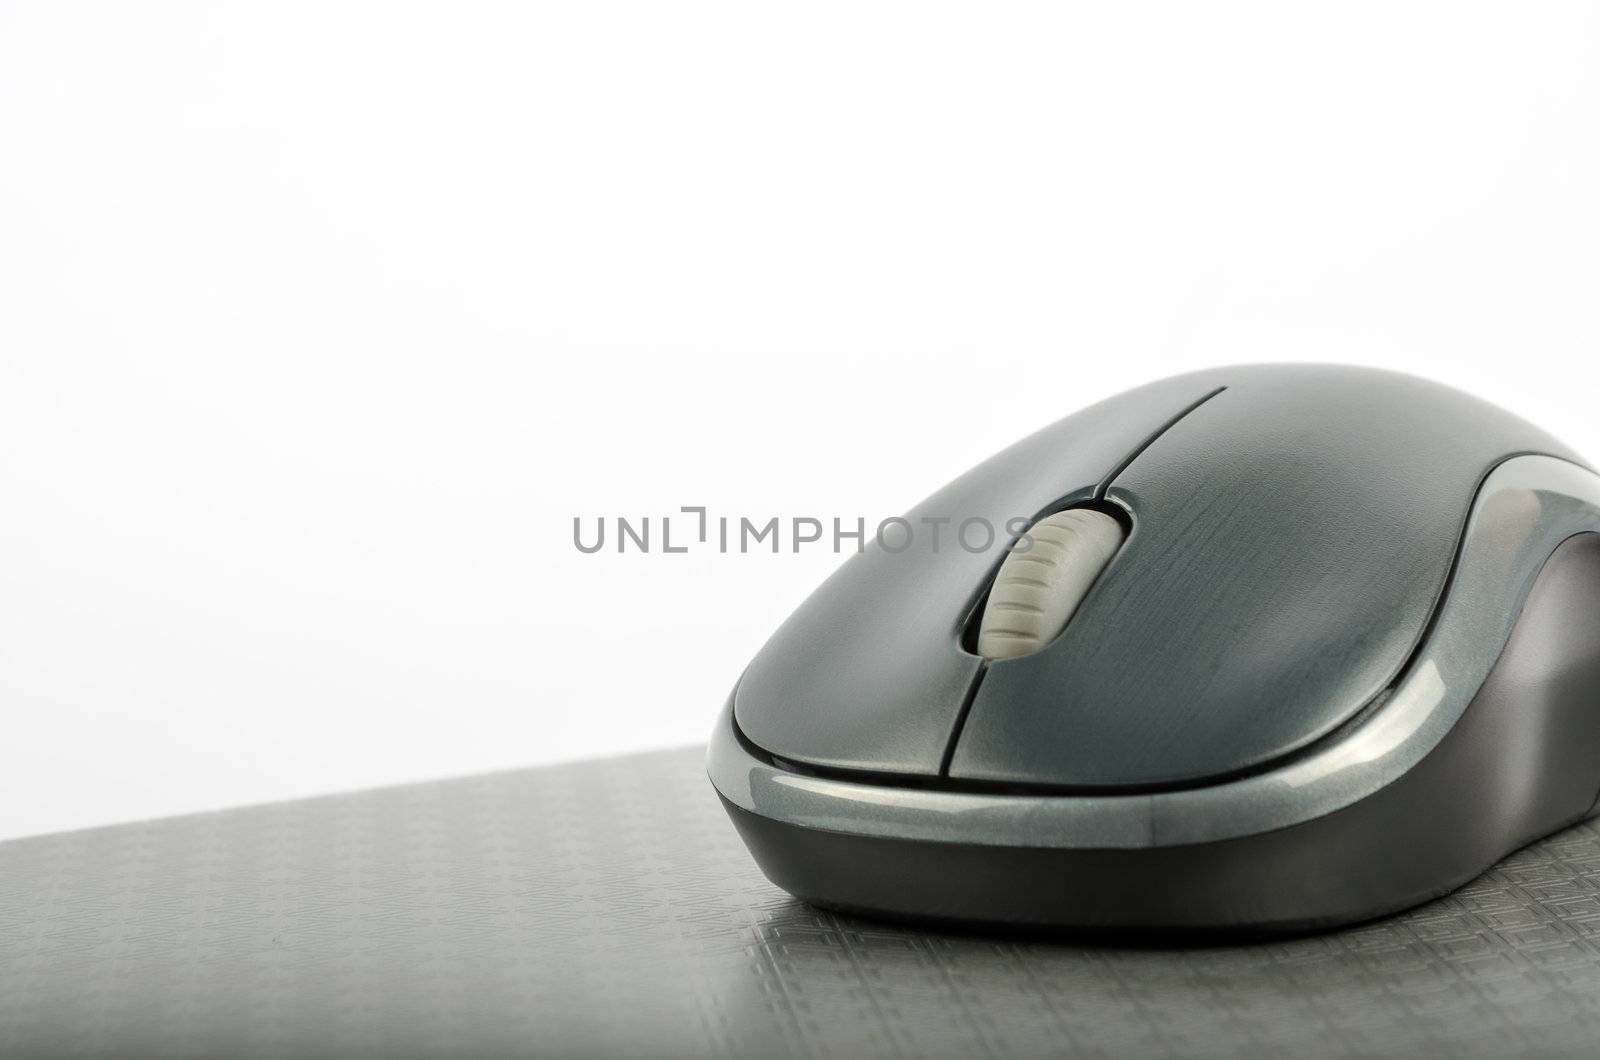 Wireless computer mouse on a metallic background